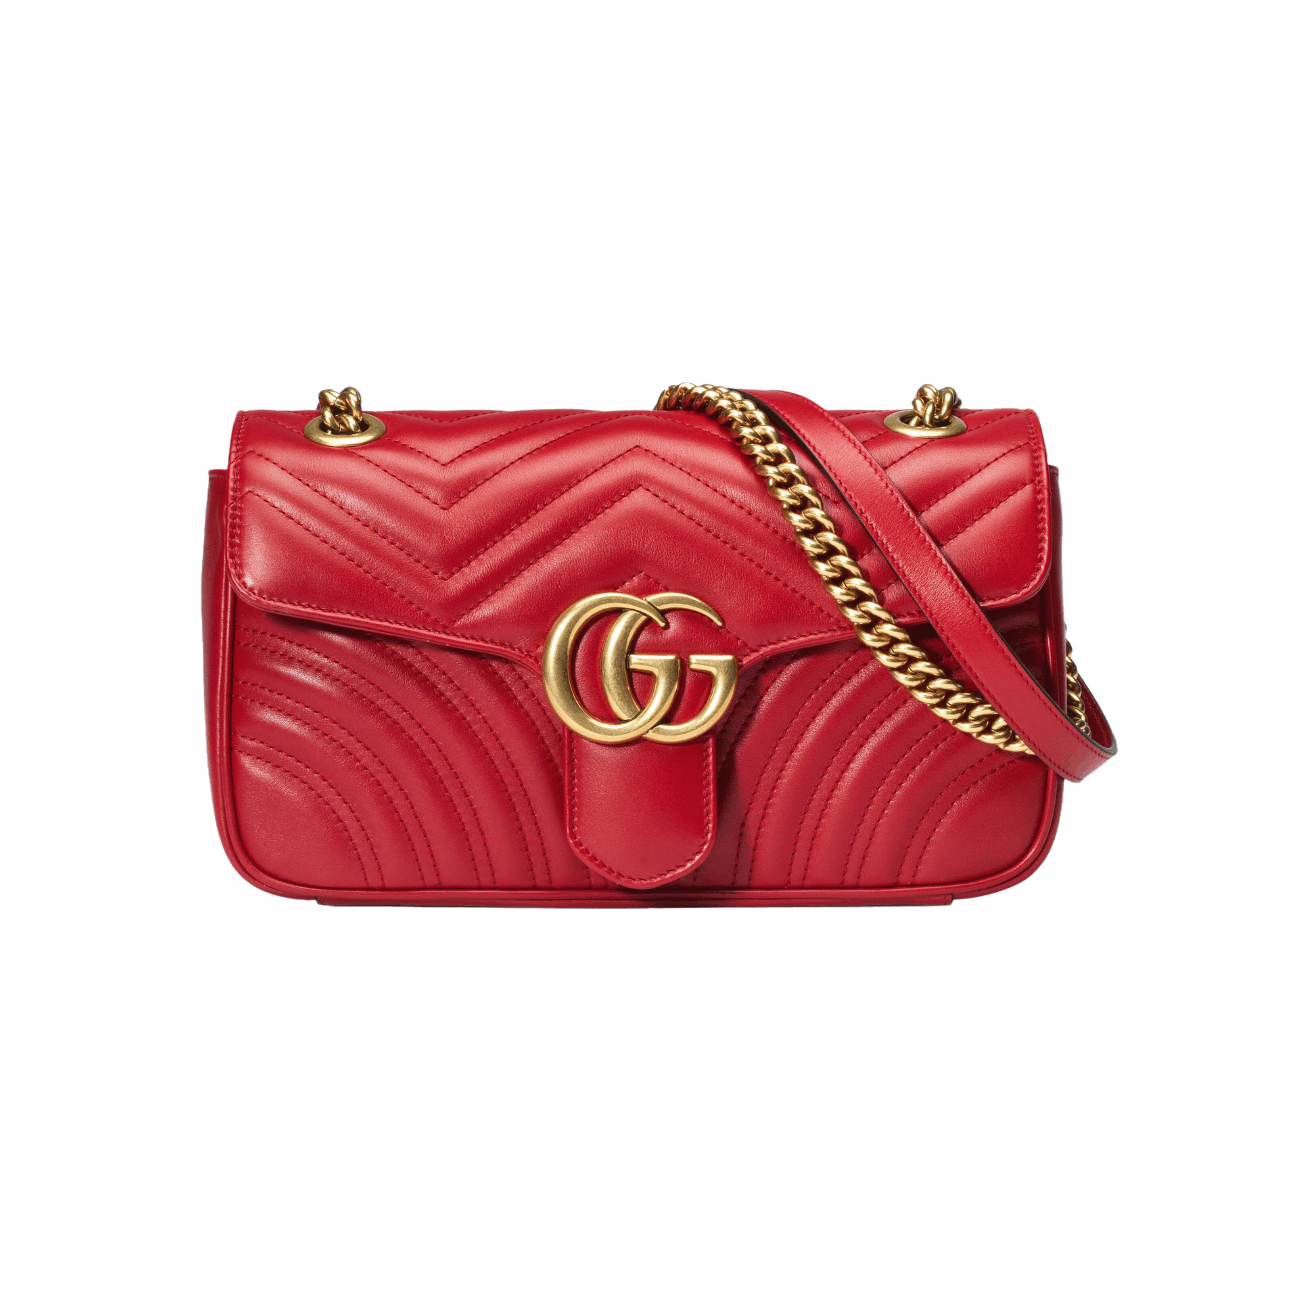 Gucci ‎443497 DTDID 6433 GG Marmont Small Shoulder Bag, Red